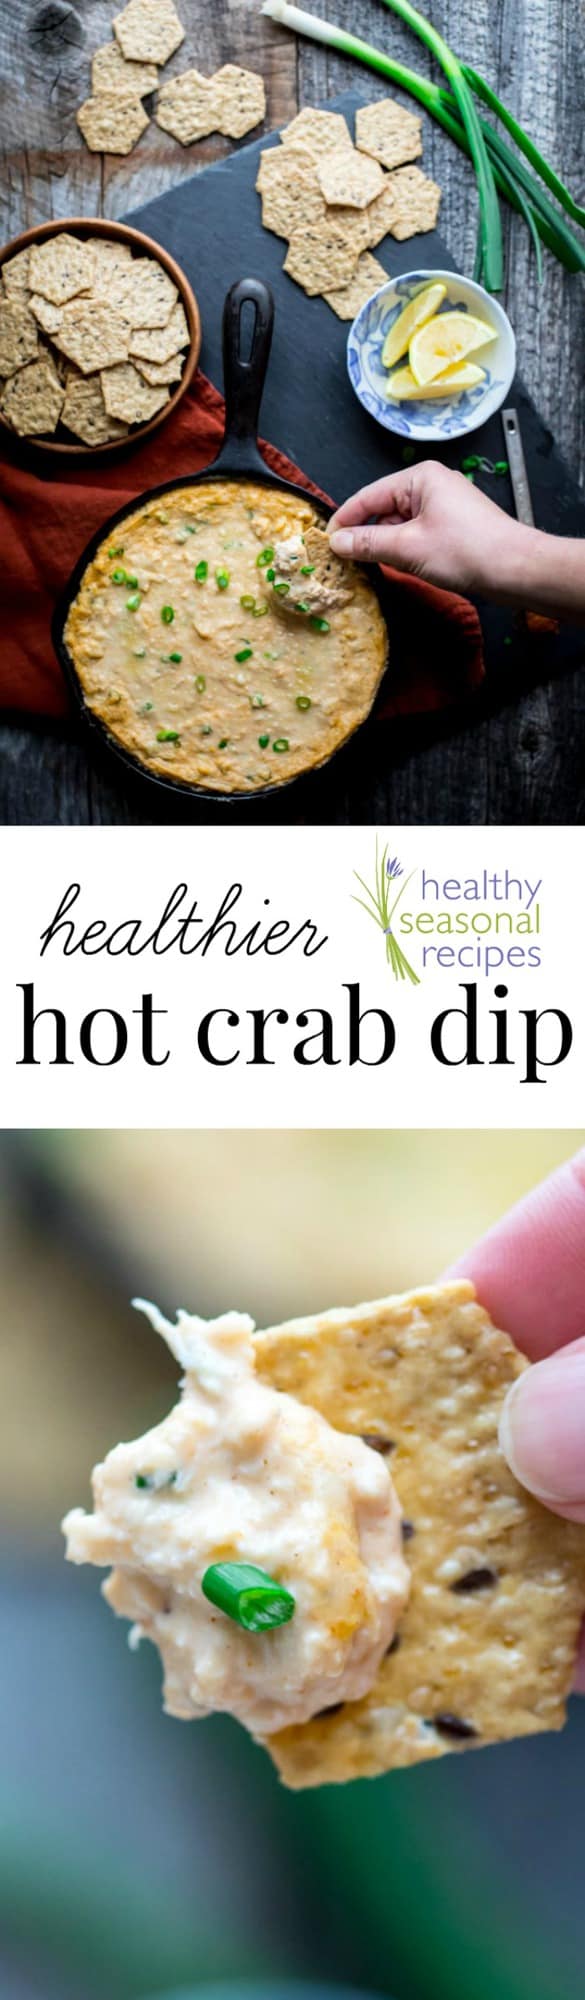 crab dip on a cracker and in a skillet with text